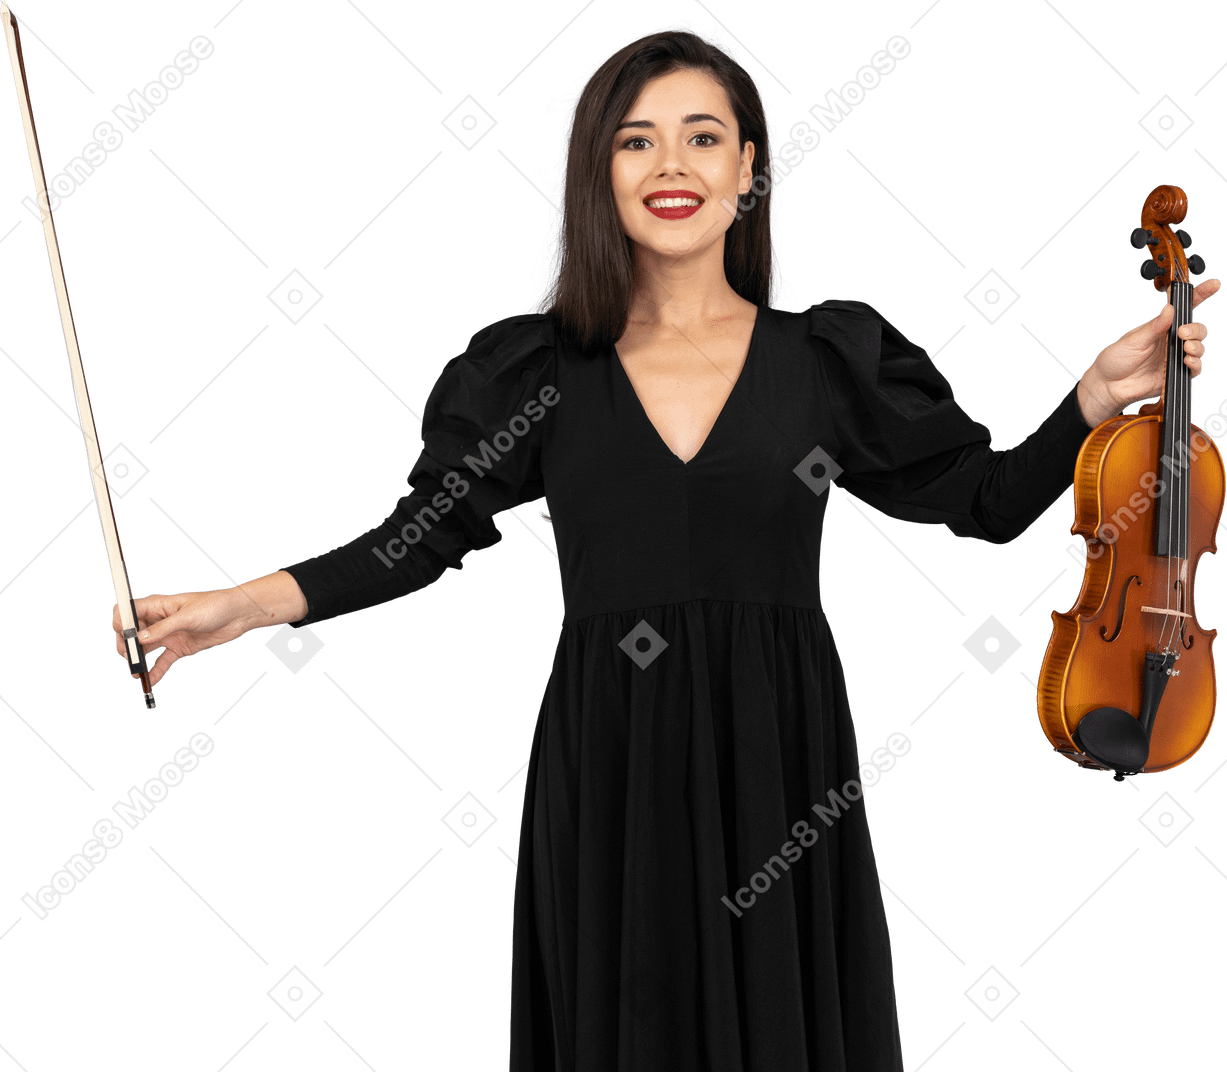 Front view of a female violin player in black dress making a bow